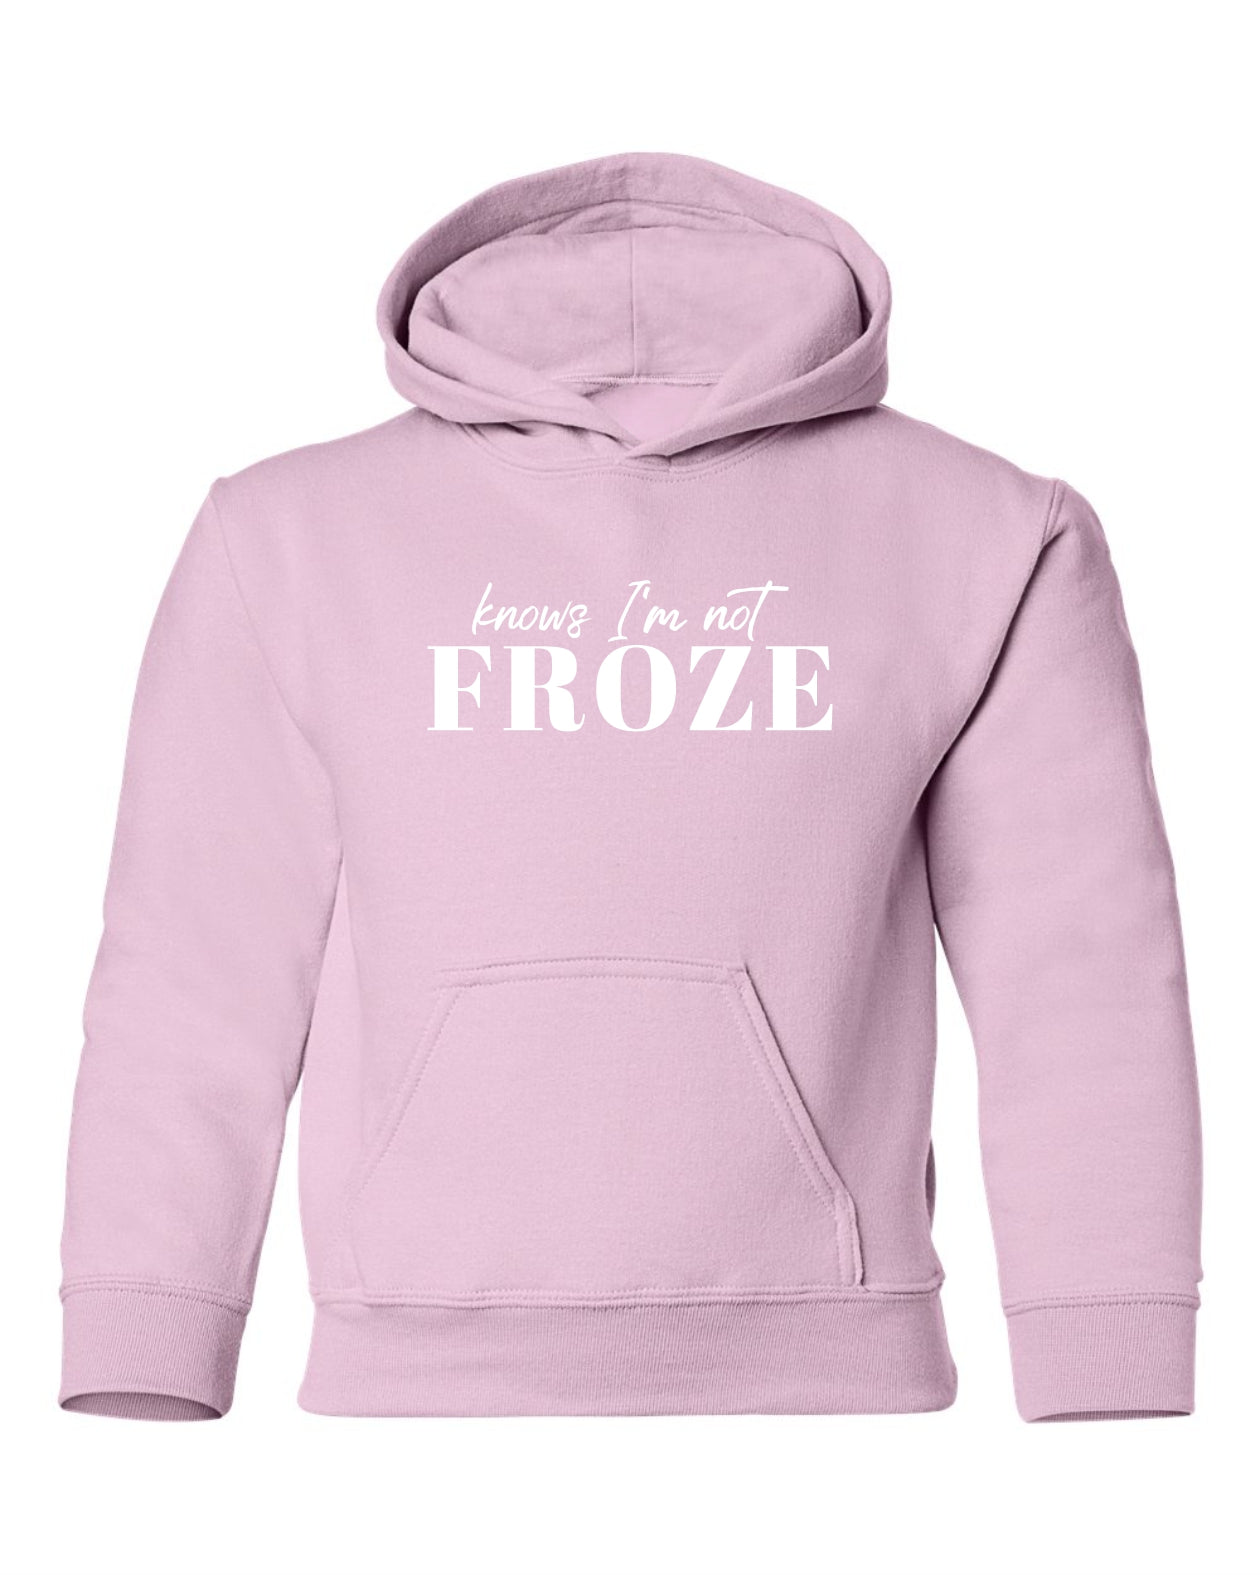 "Knows I'm Not Froze" Youth Hoodie